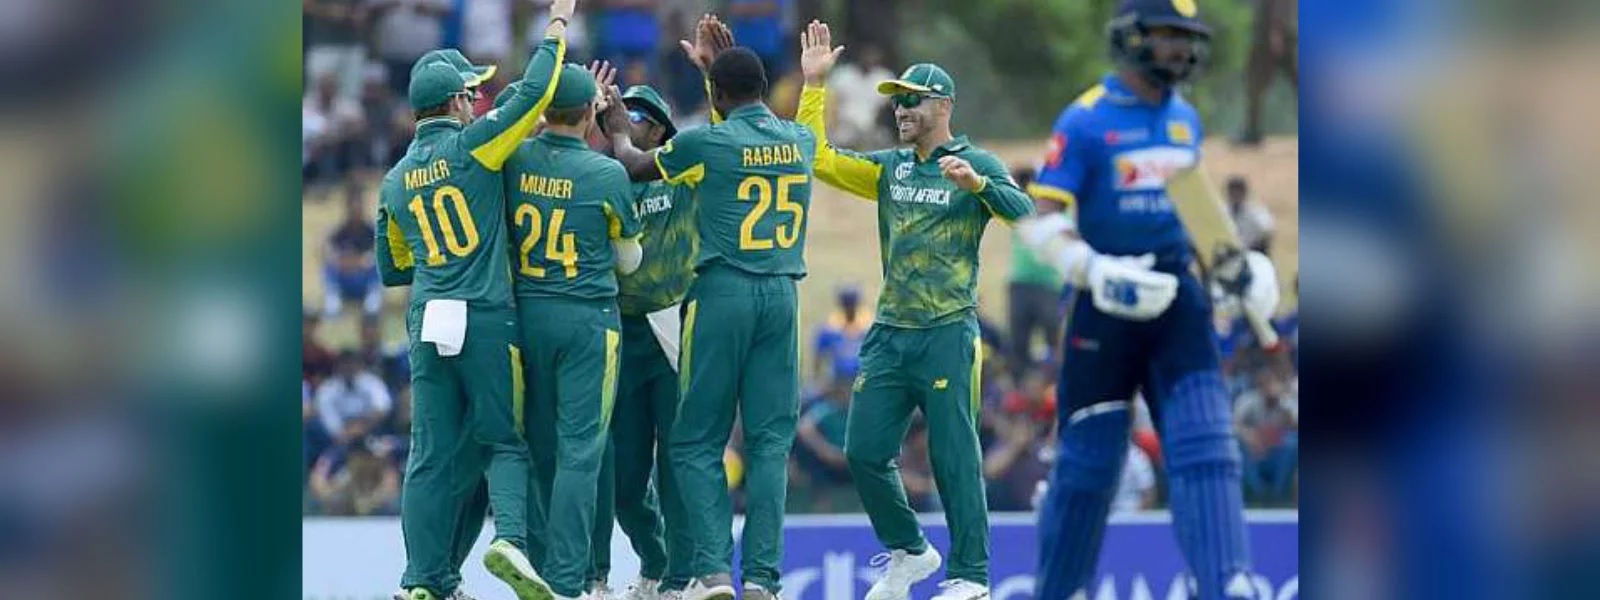 South Africa wins the ODI series